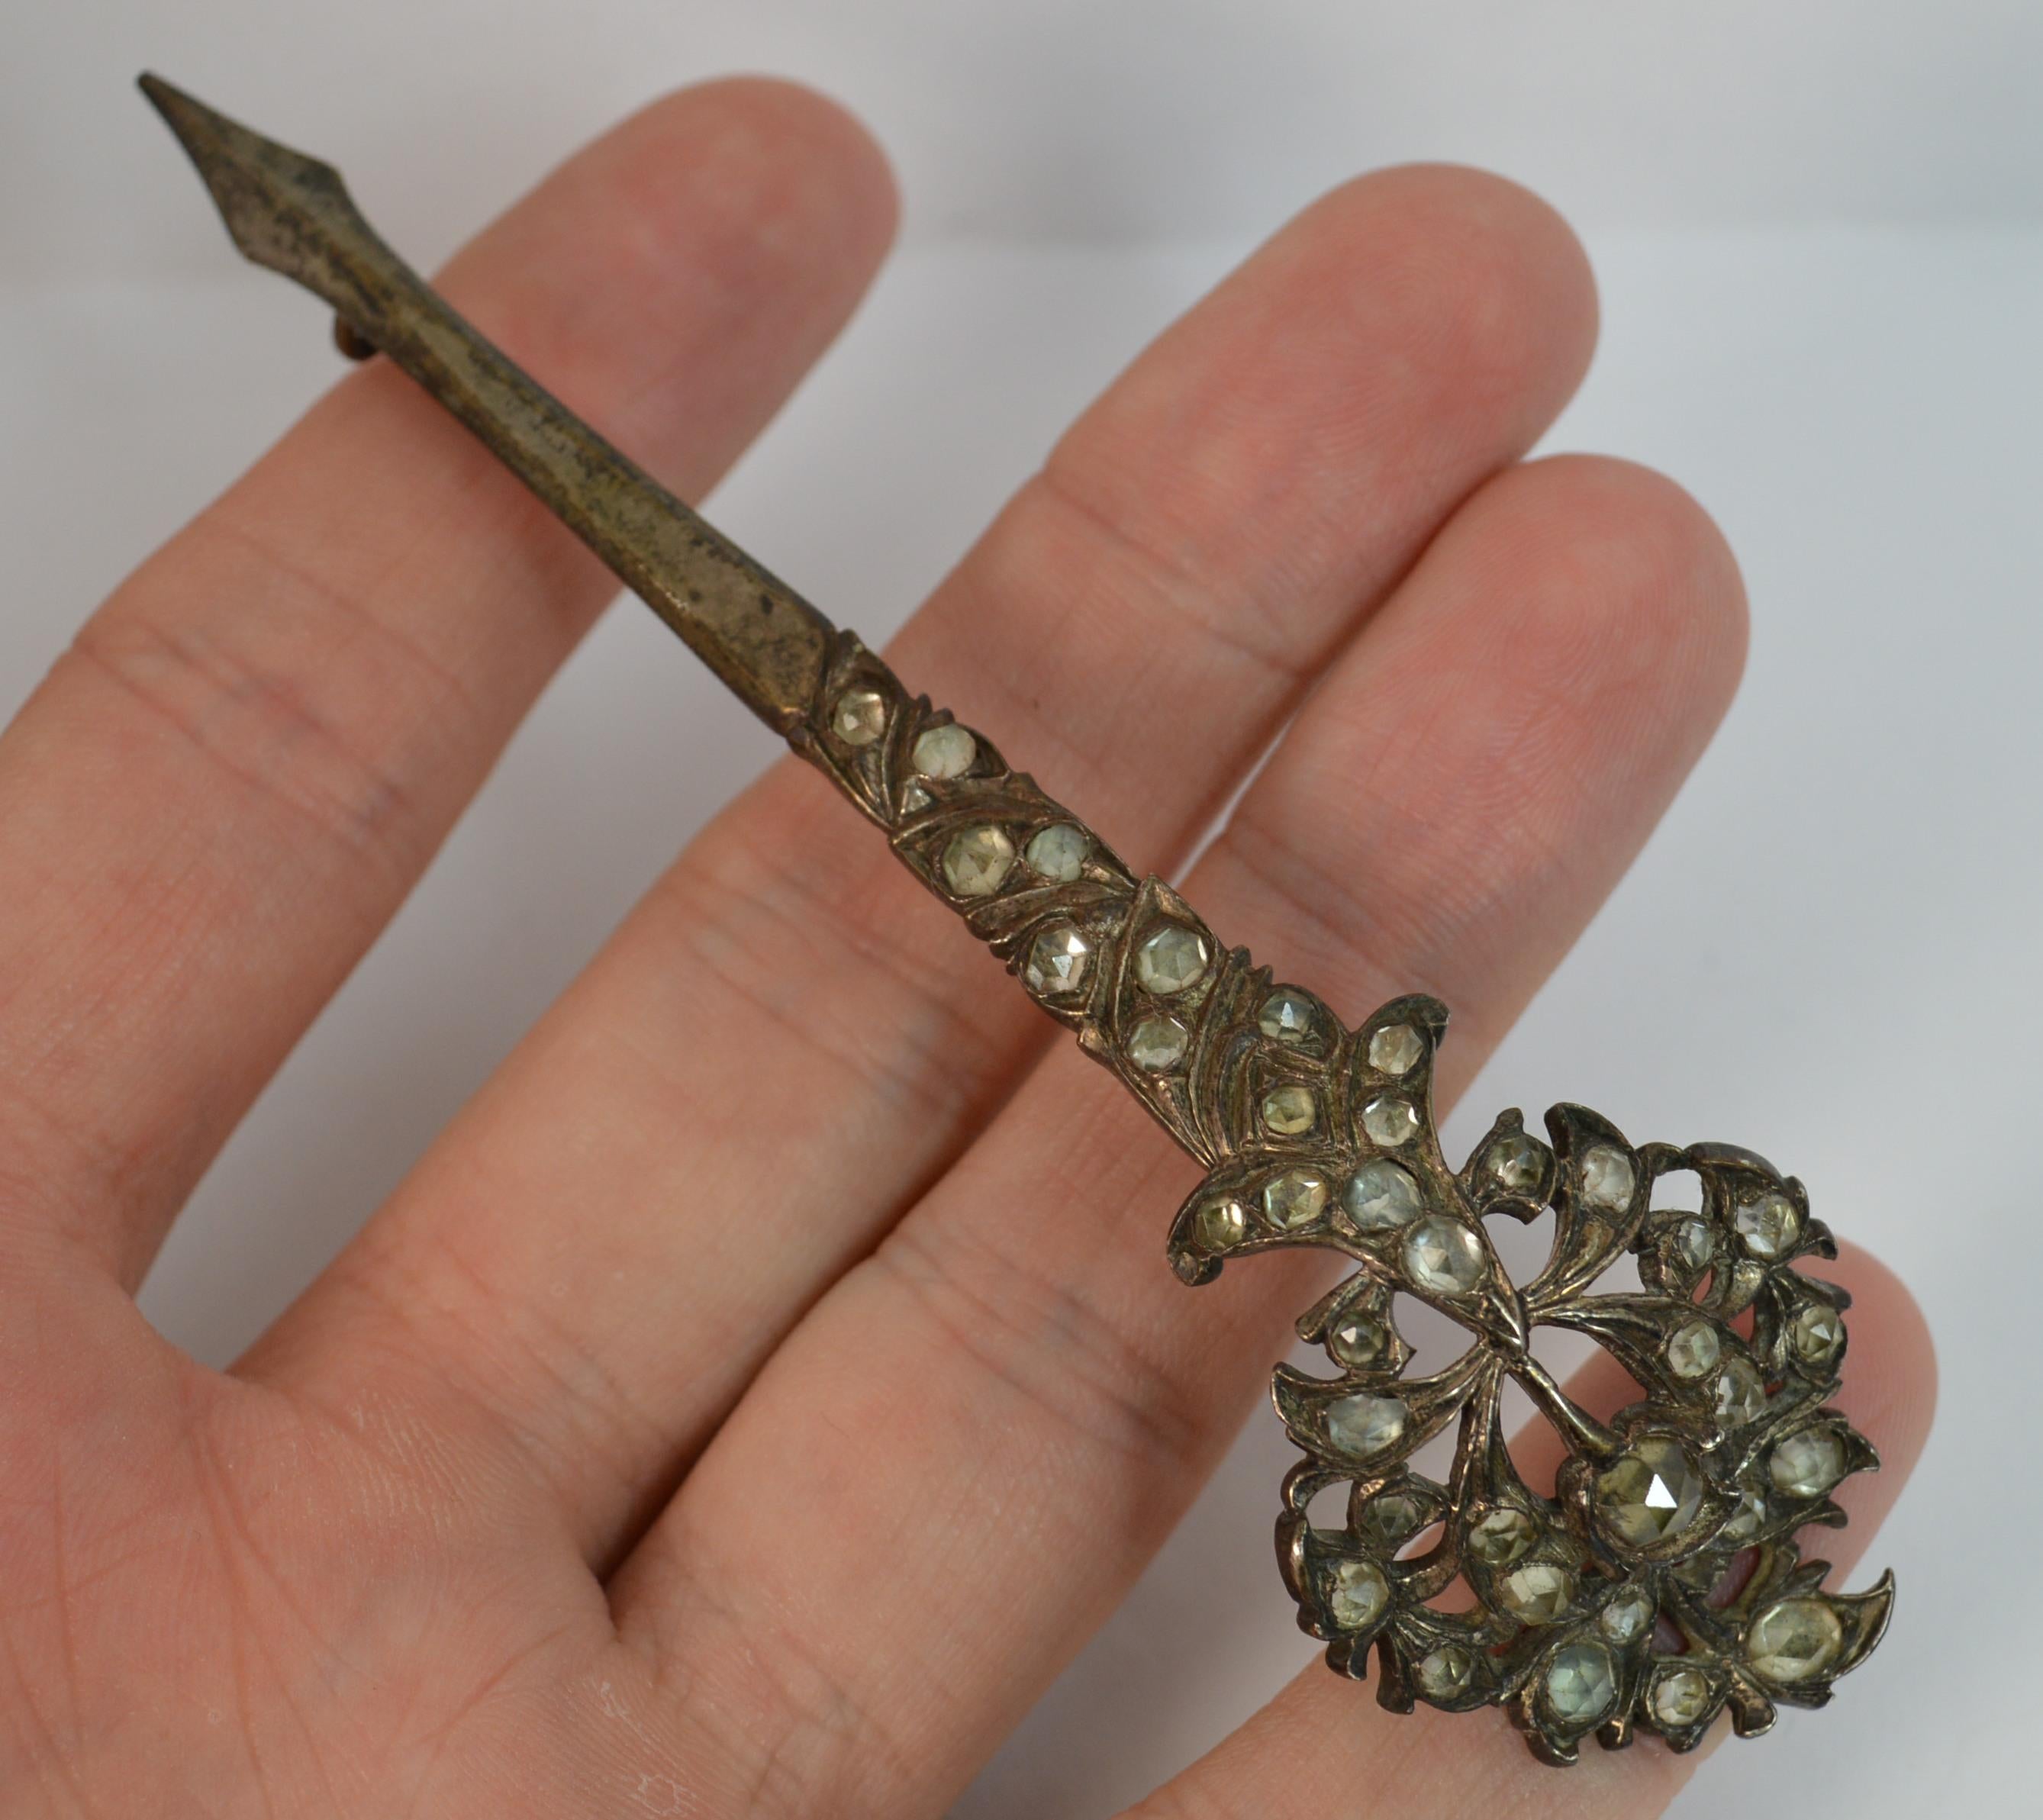 A very early kondakoora brooch. Stylish shape and design. Set with multiple rose cut rock crystal stones. Wonderful design.

Condition ; Very good. Crisp pattern. Issue free. Working pin and hinge. Original stones. Please view